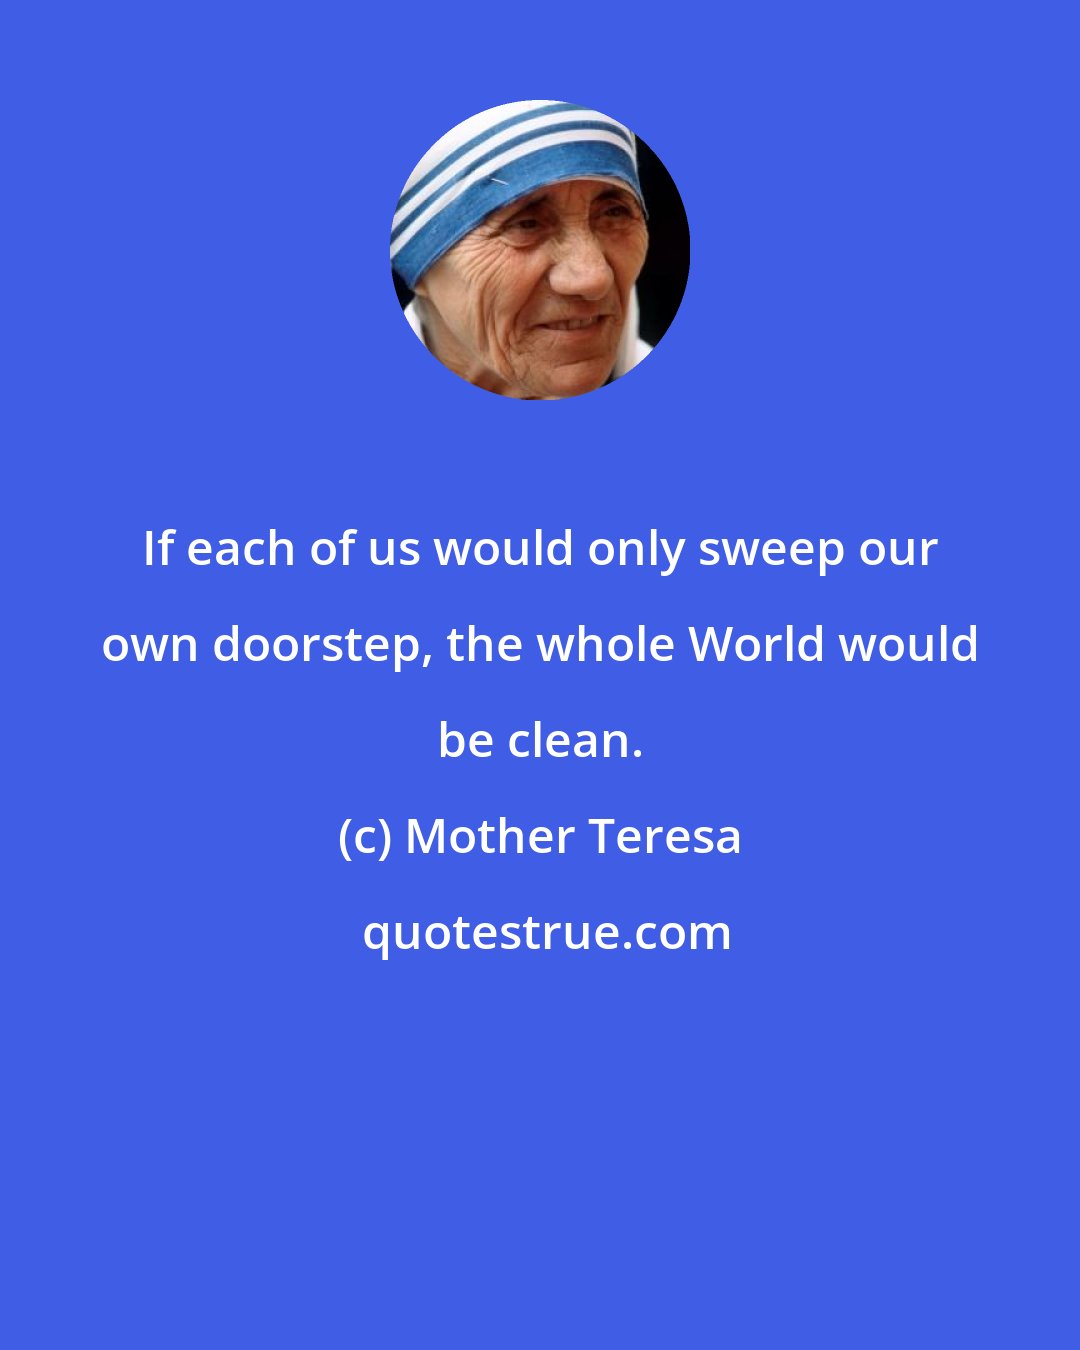 Mother Teresa: If each of us would only sweep our own doorstep, the whole World would be clean.